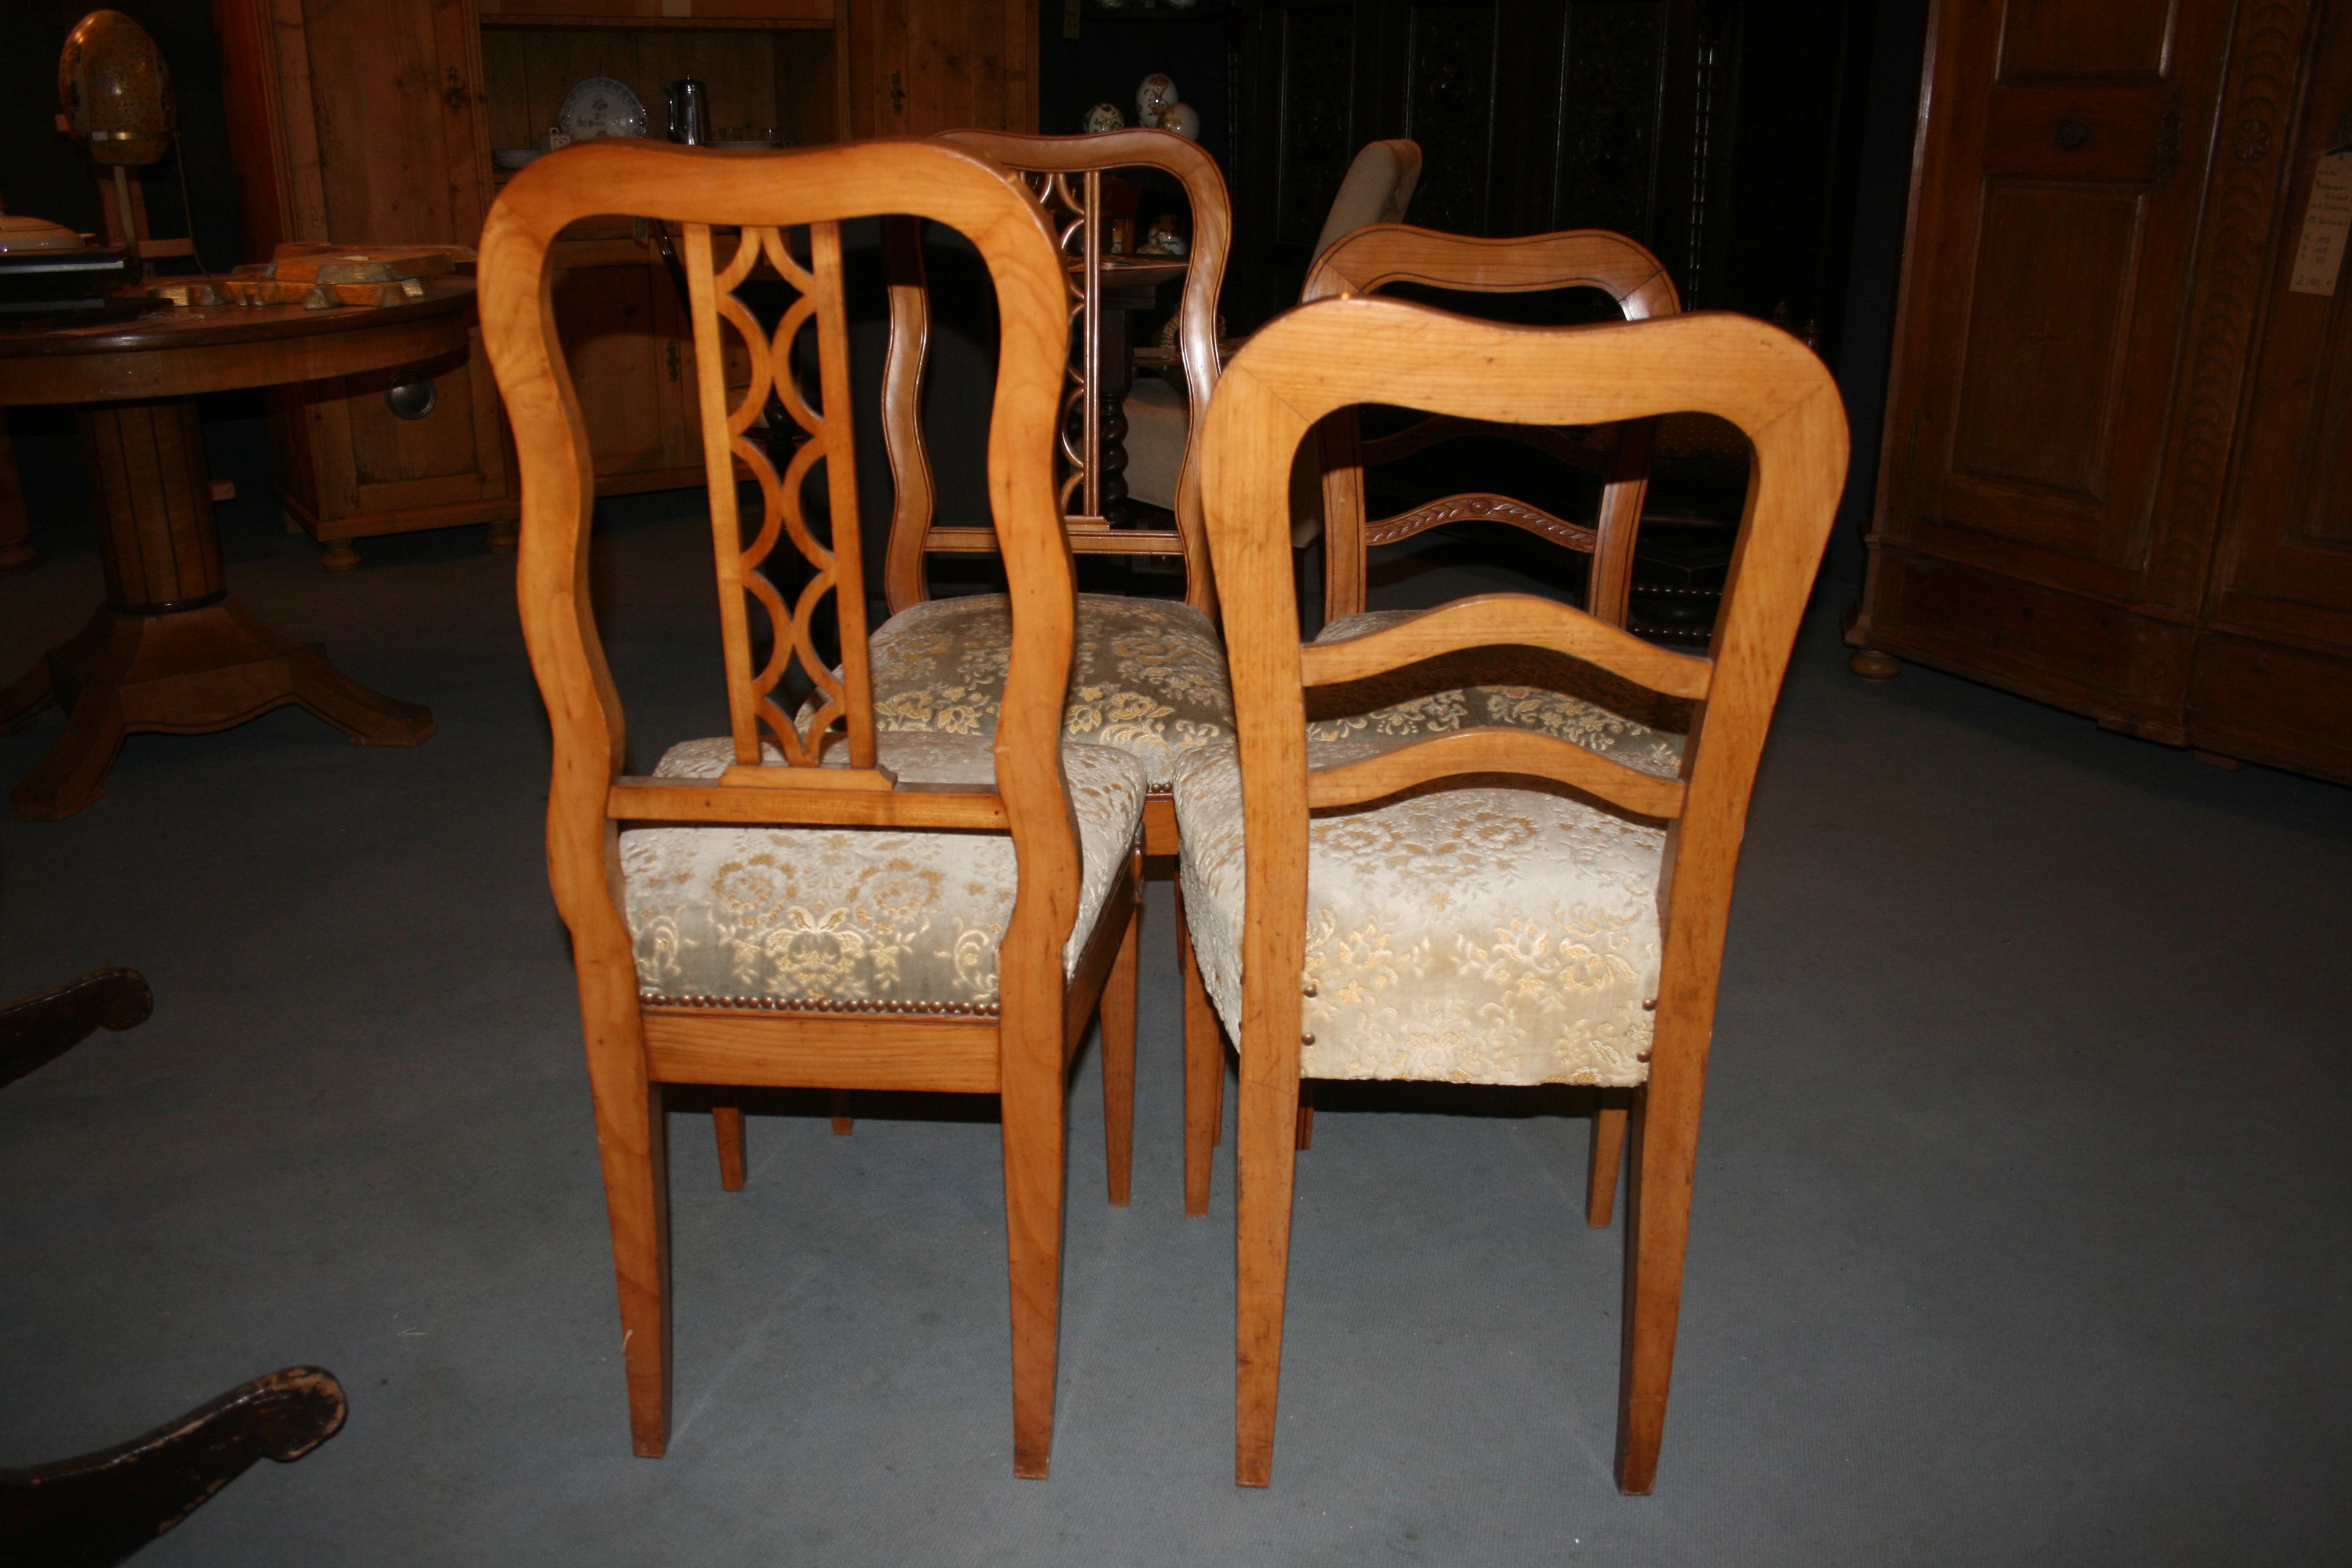 Upholstery Antique German Biedermeier Chairs, Set of 4, Fruitwood, circa 1840 For Sale